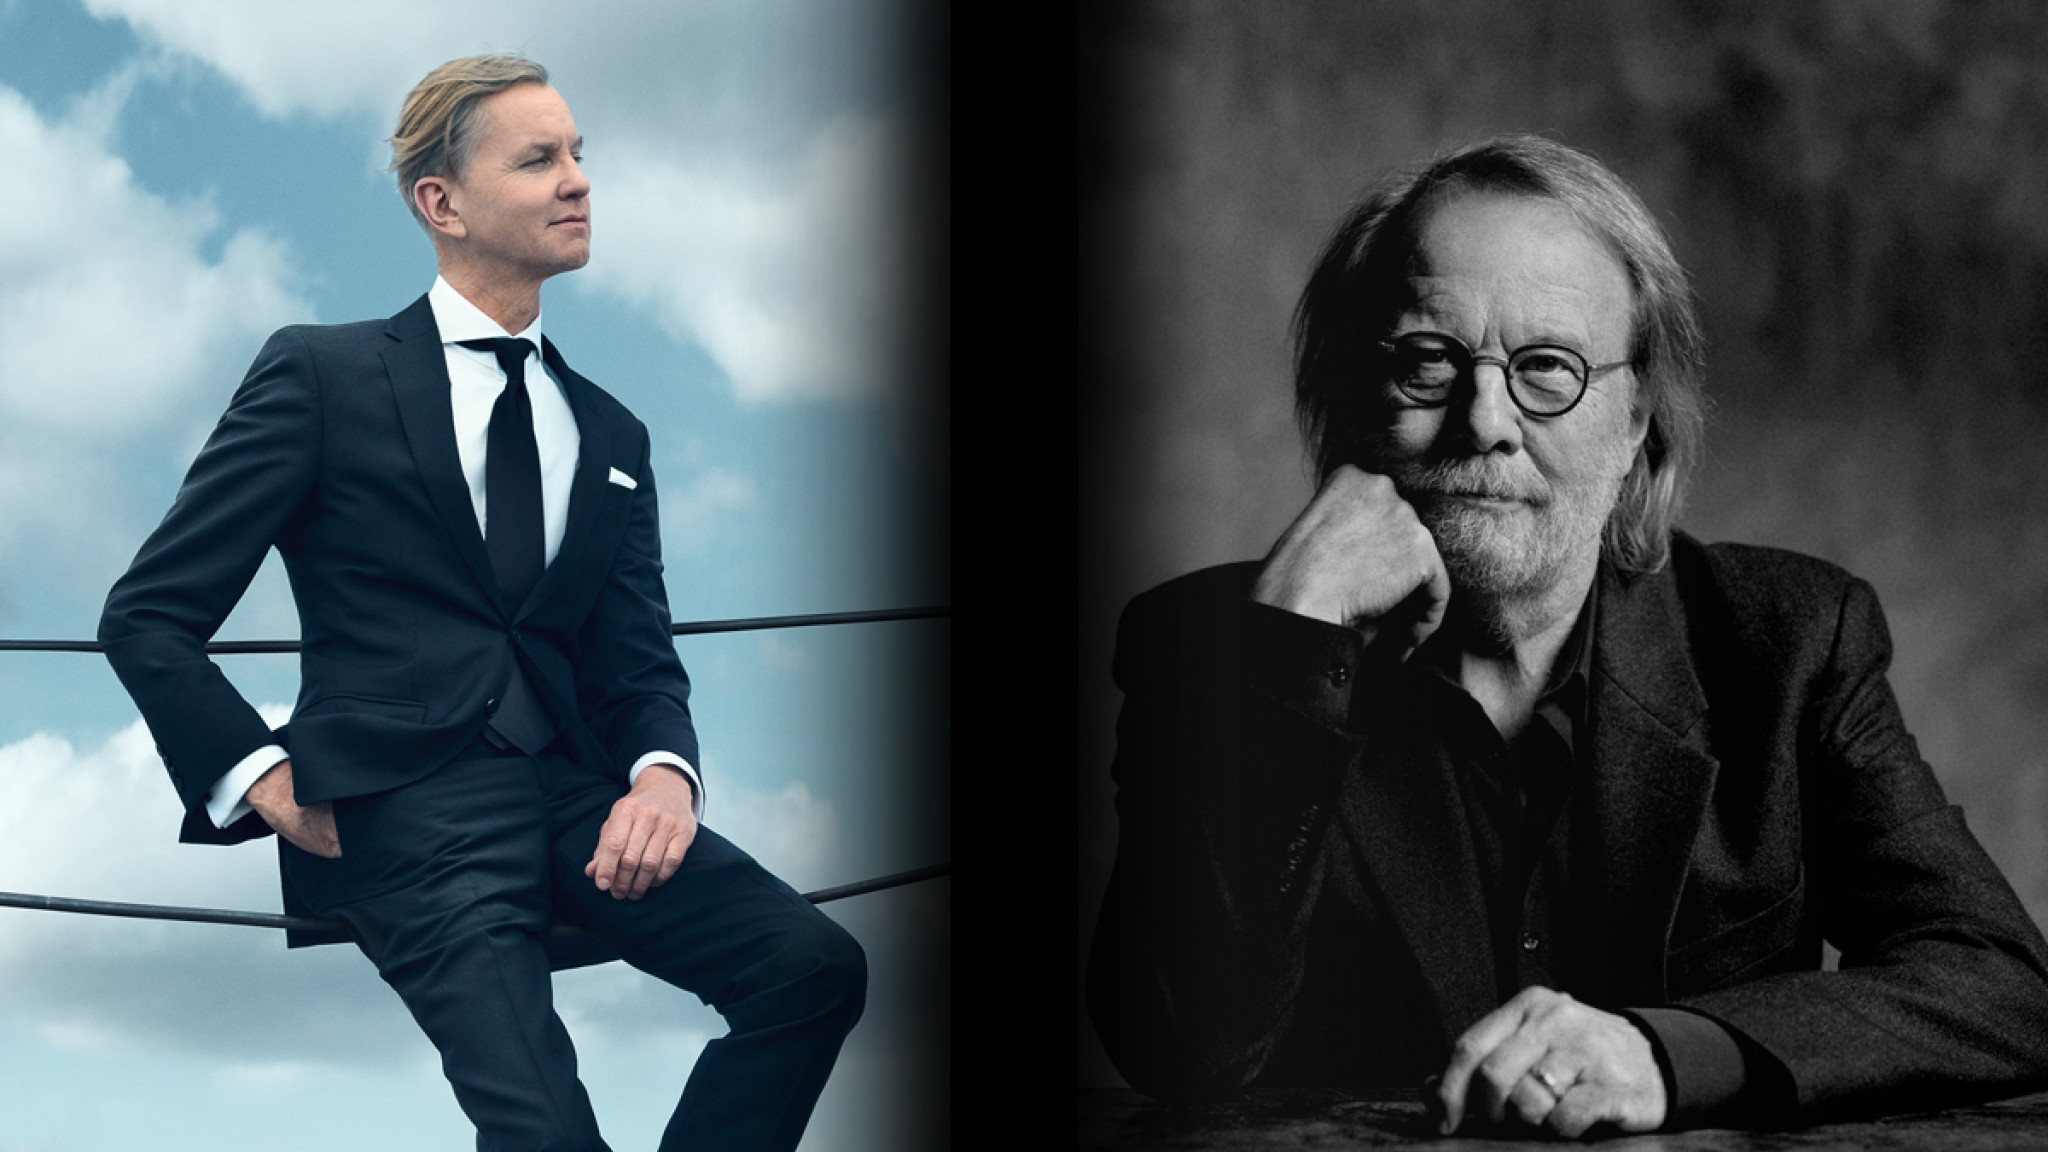 Max Raabe, Benny Andersson